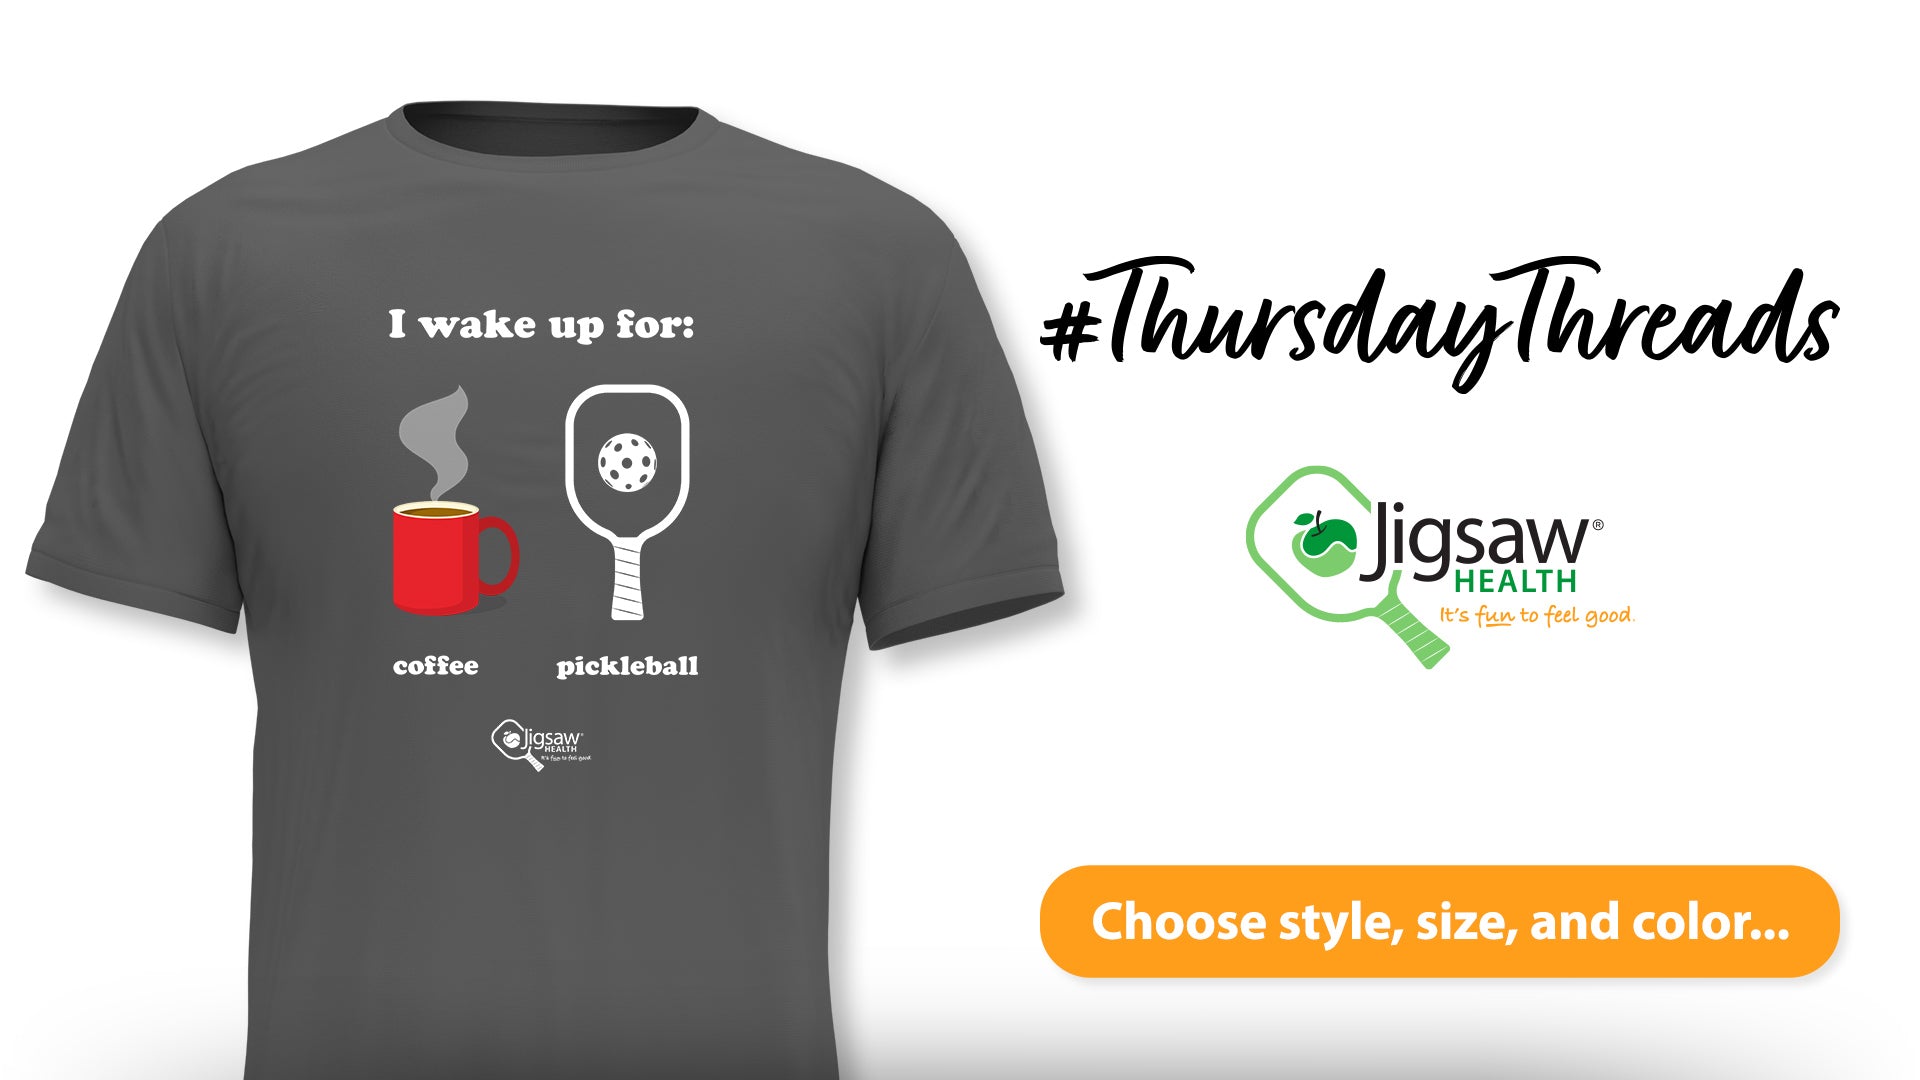 I wake up for: Coffee and Pickleball #ThursdayThreads